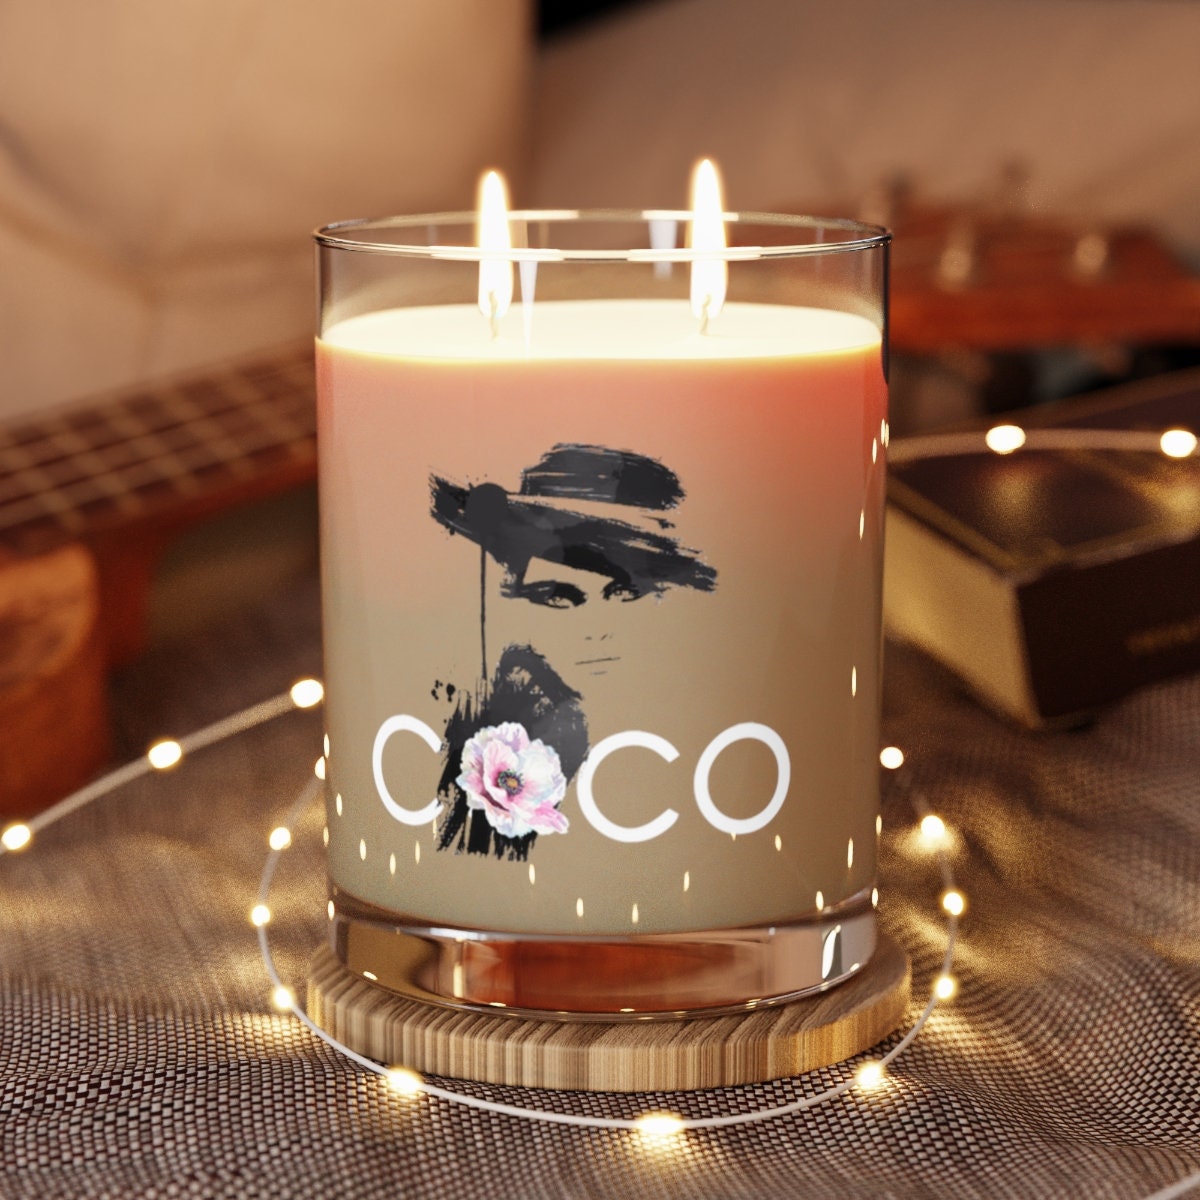 Coco Scented Candle Full Glass 11oz - Etsy